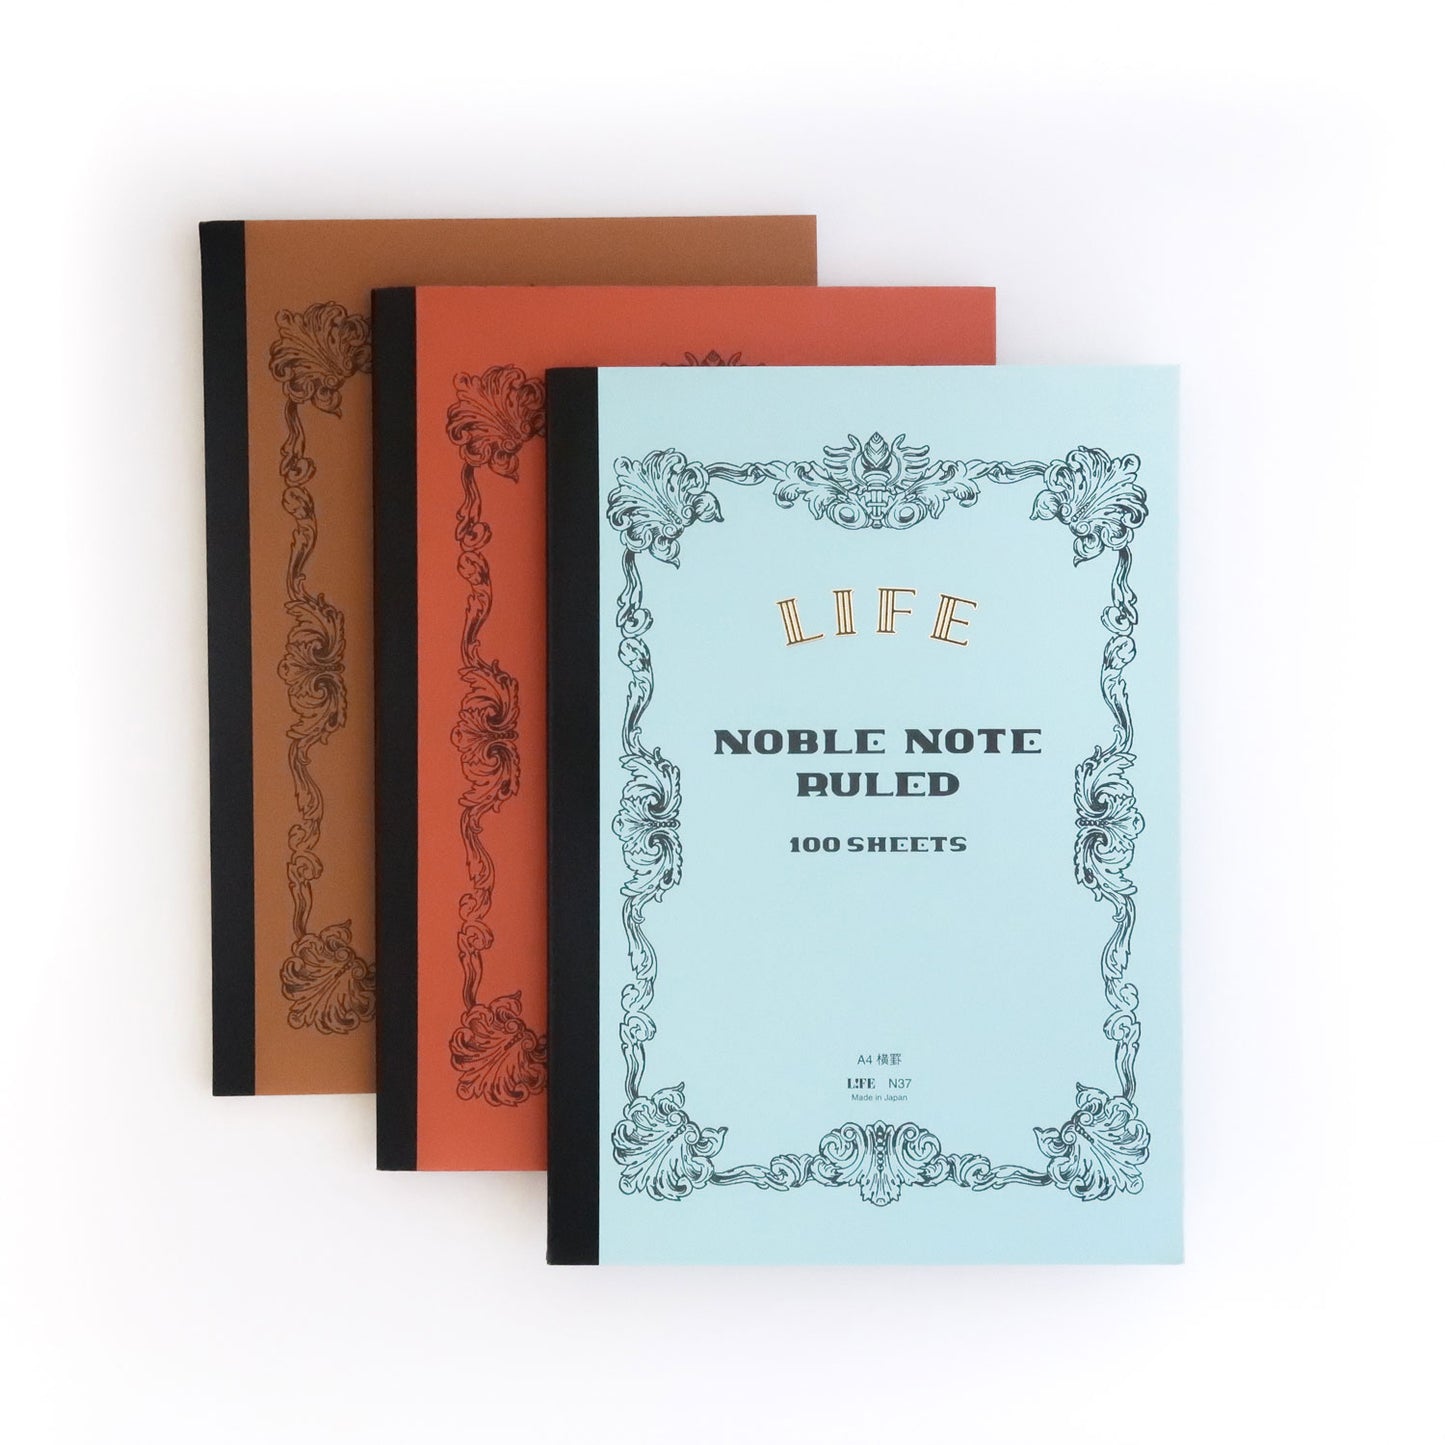 Notebooks with elaborate bordered cover with gold-foil printed LIFE logo, in light blue, orange, and brown